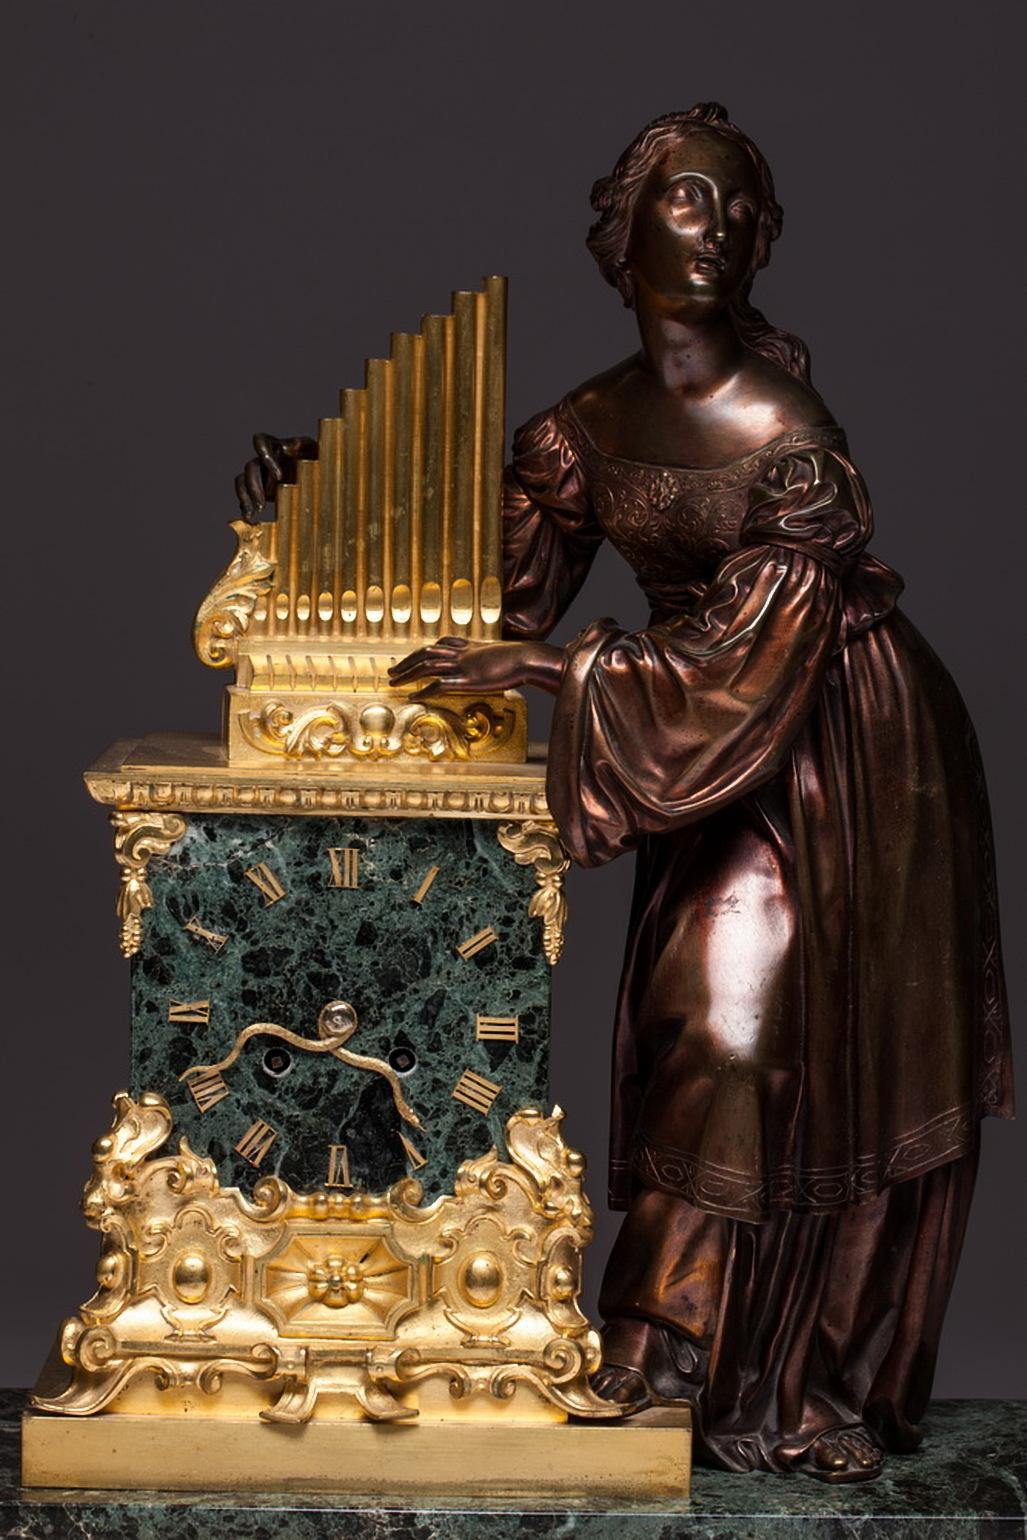 A green marble massive clock with an impressive female figure that plays with a musical instrument. Clock decorated with a lot of bronze. The most special thing is that clock mechanism arrow is like a snake. The neo-Gothic style is an architectural